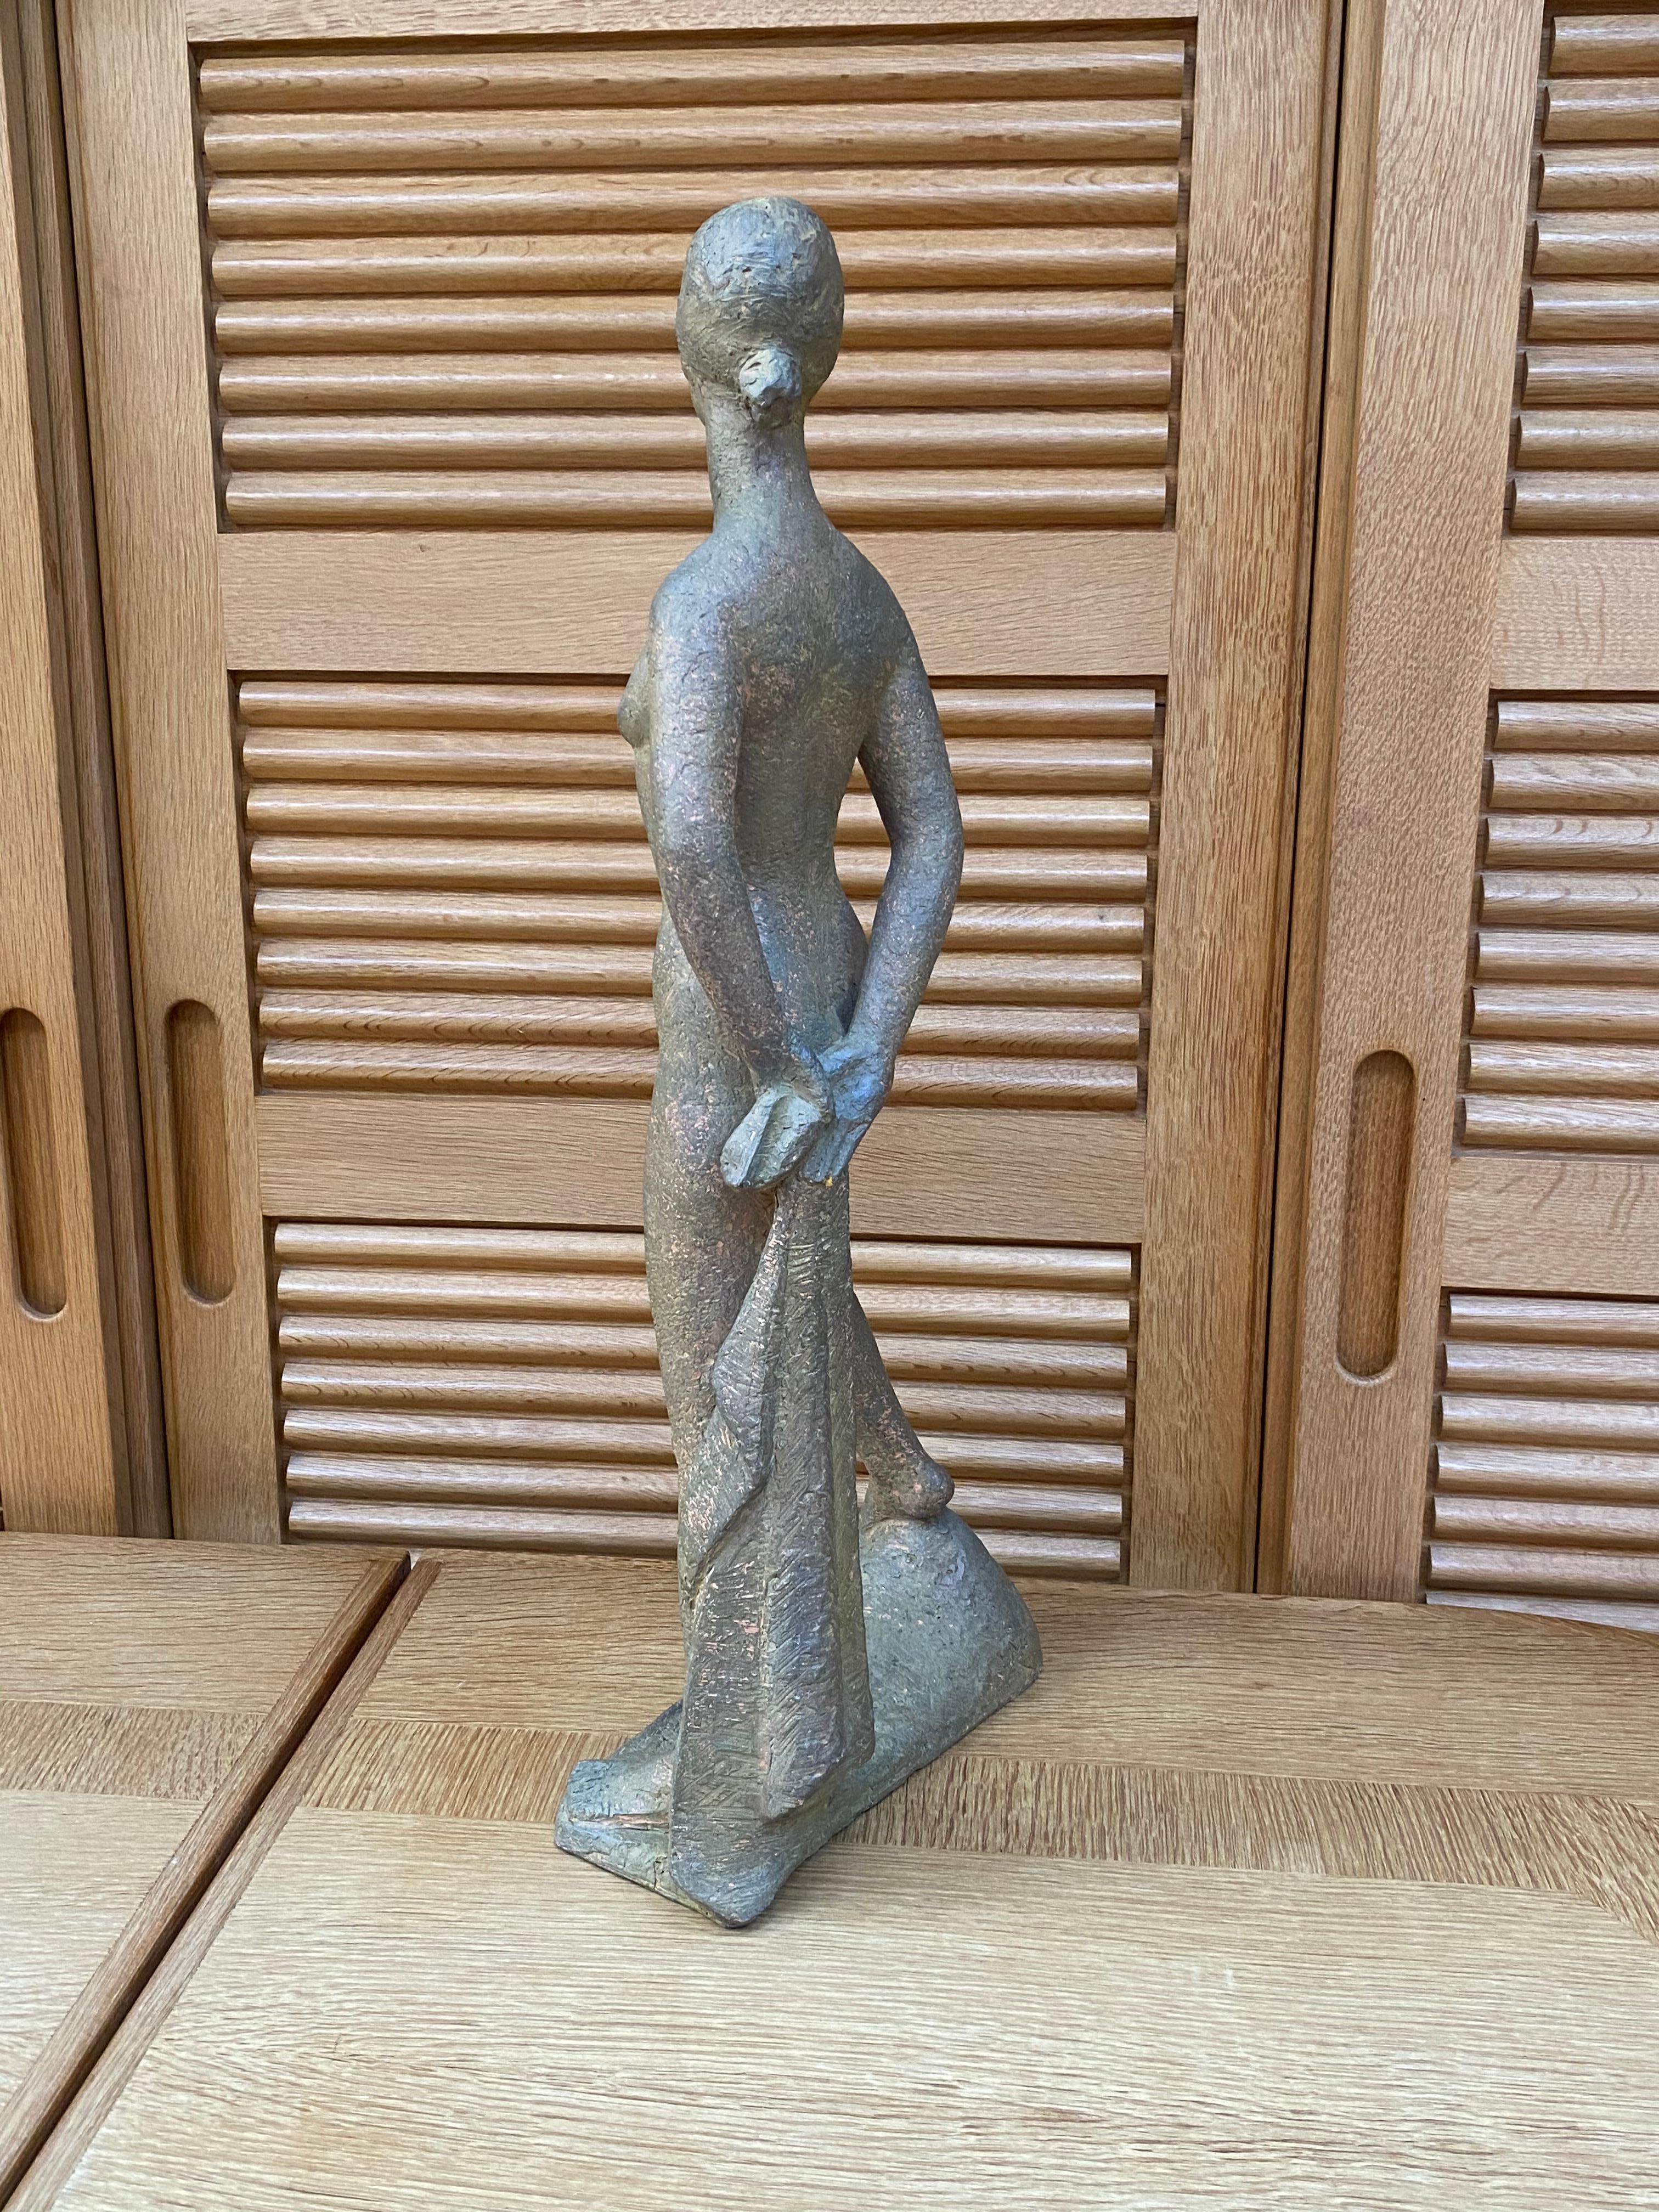 Terracotta Sculpture, Monogrammed Pm for Perugini Mario, circa 1960 In Good Condition For Sale In Saint-Ouen, FR